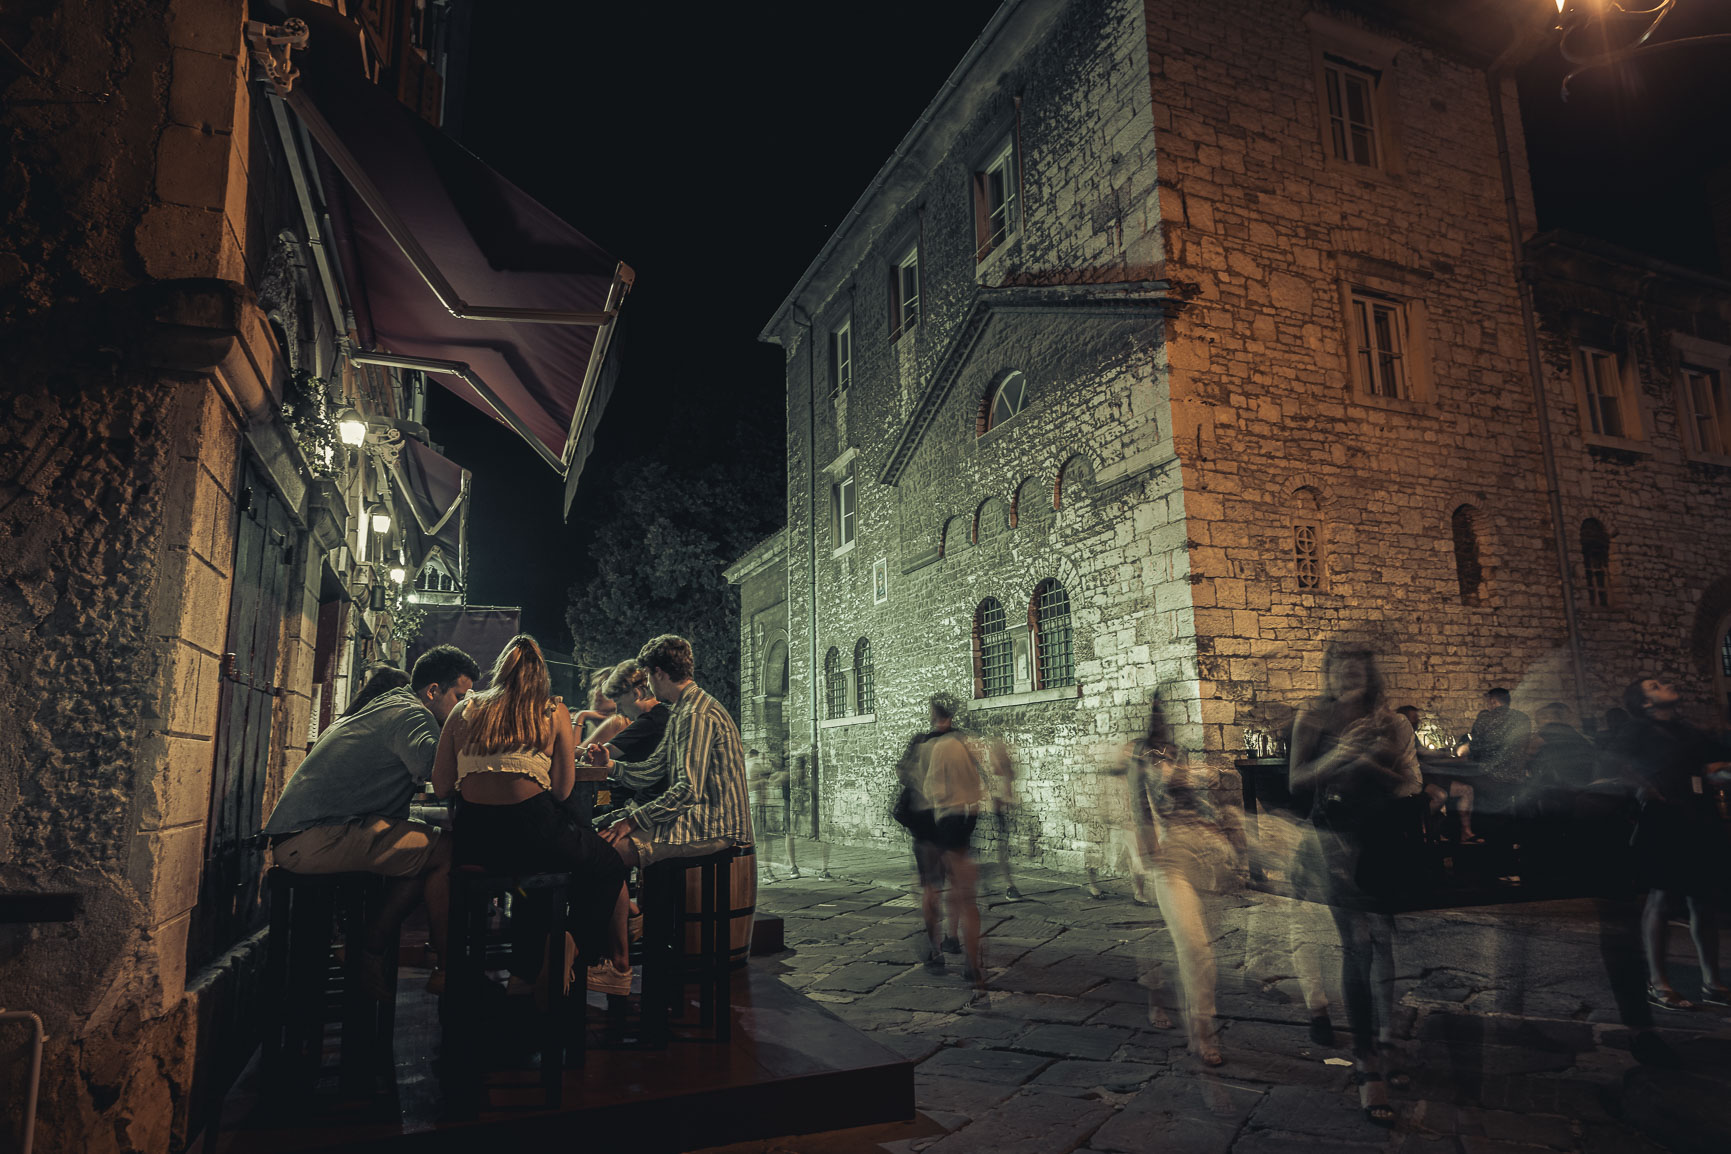 People are passing by in Pula, Croatia